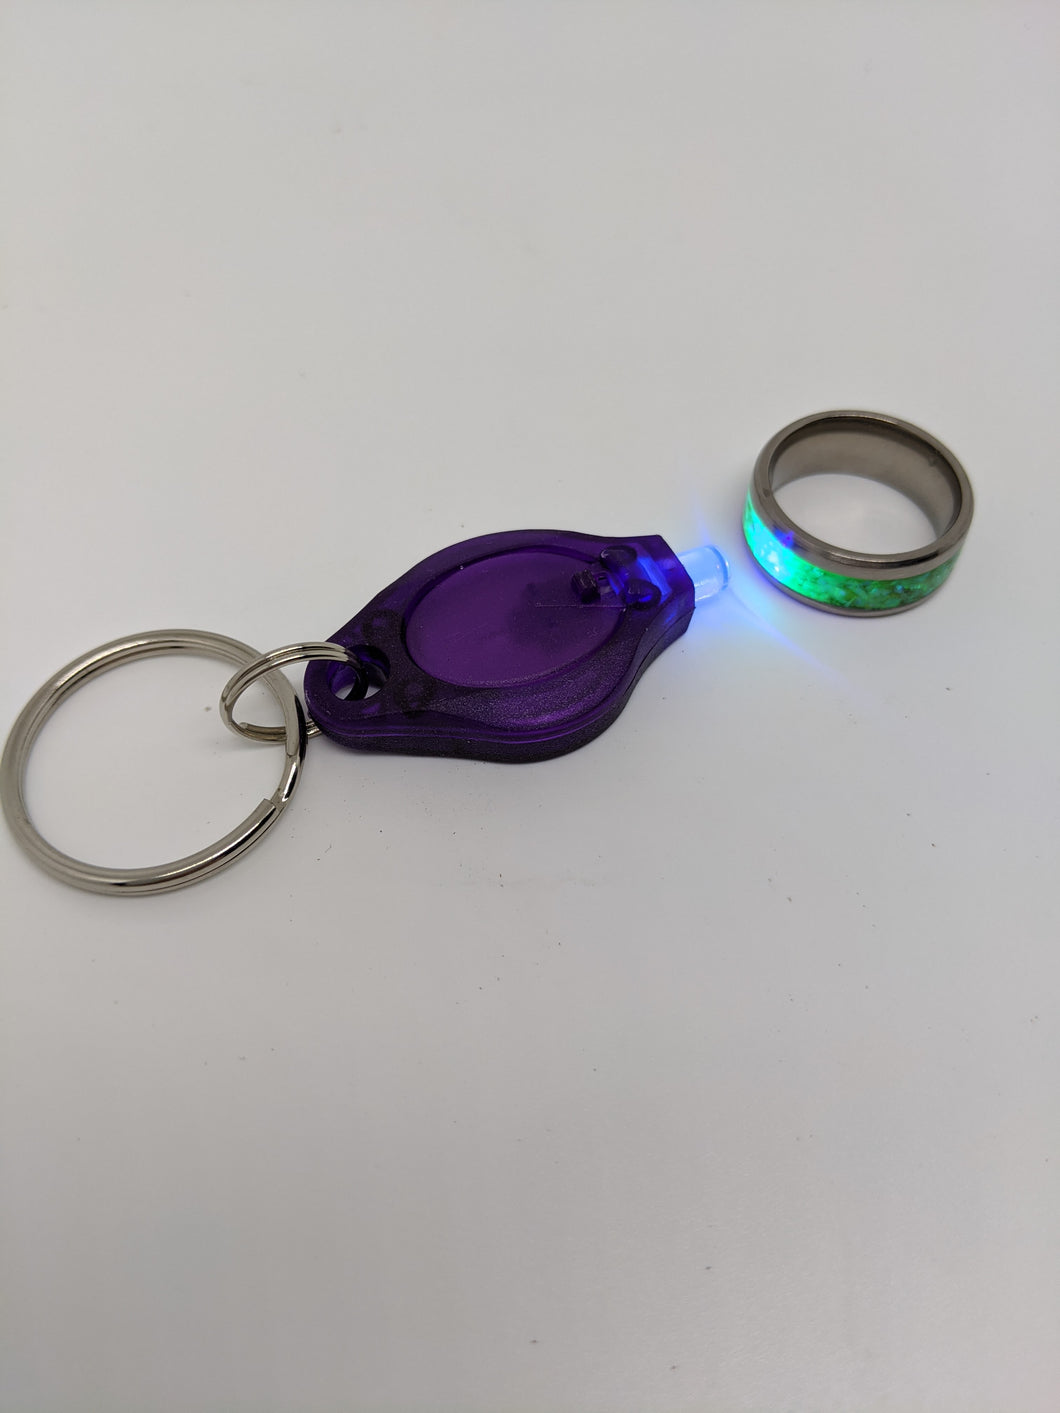 UV Flashlight Keychain - Switch on/off or Squeeze on/off